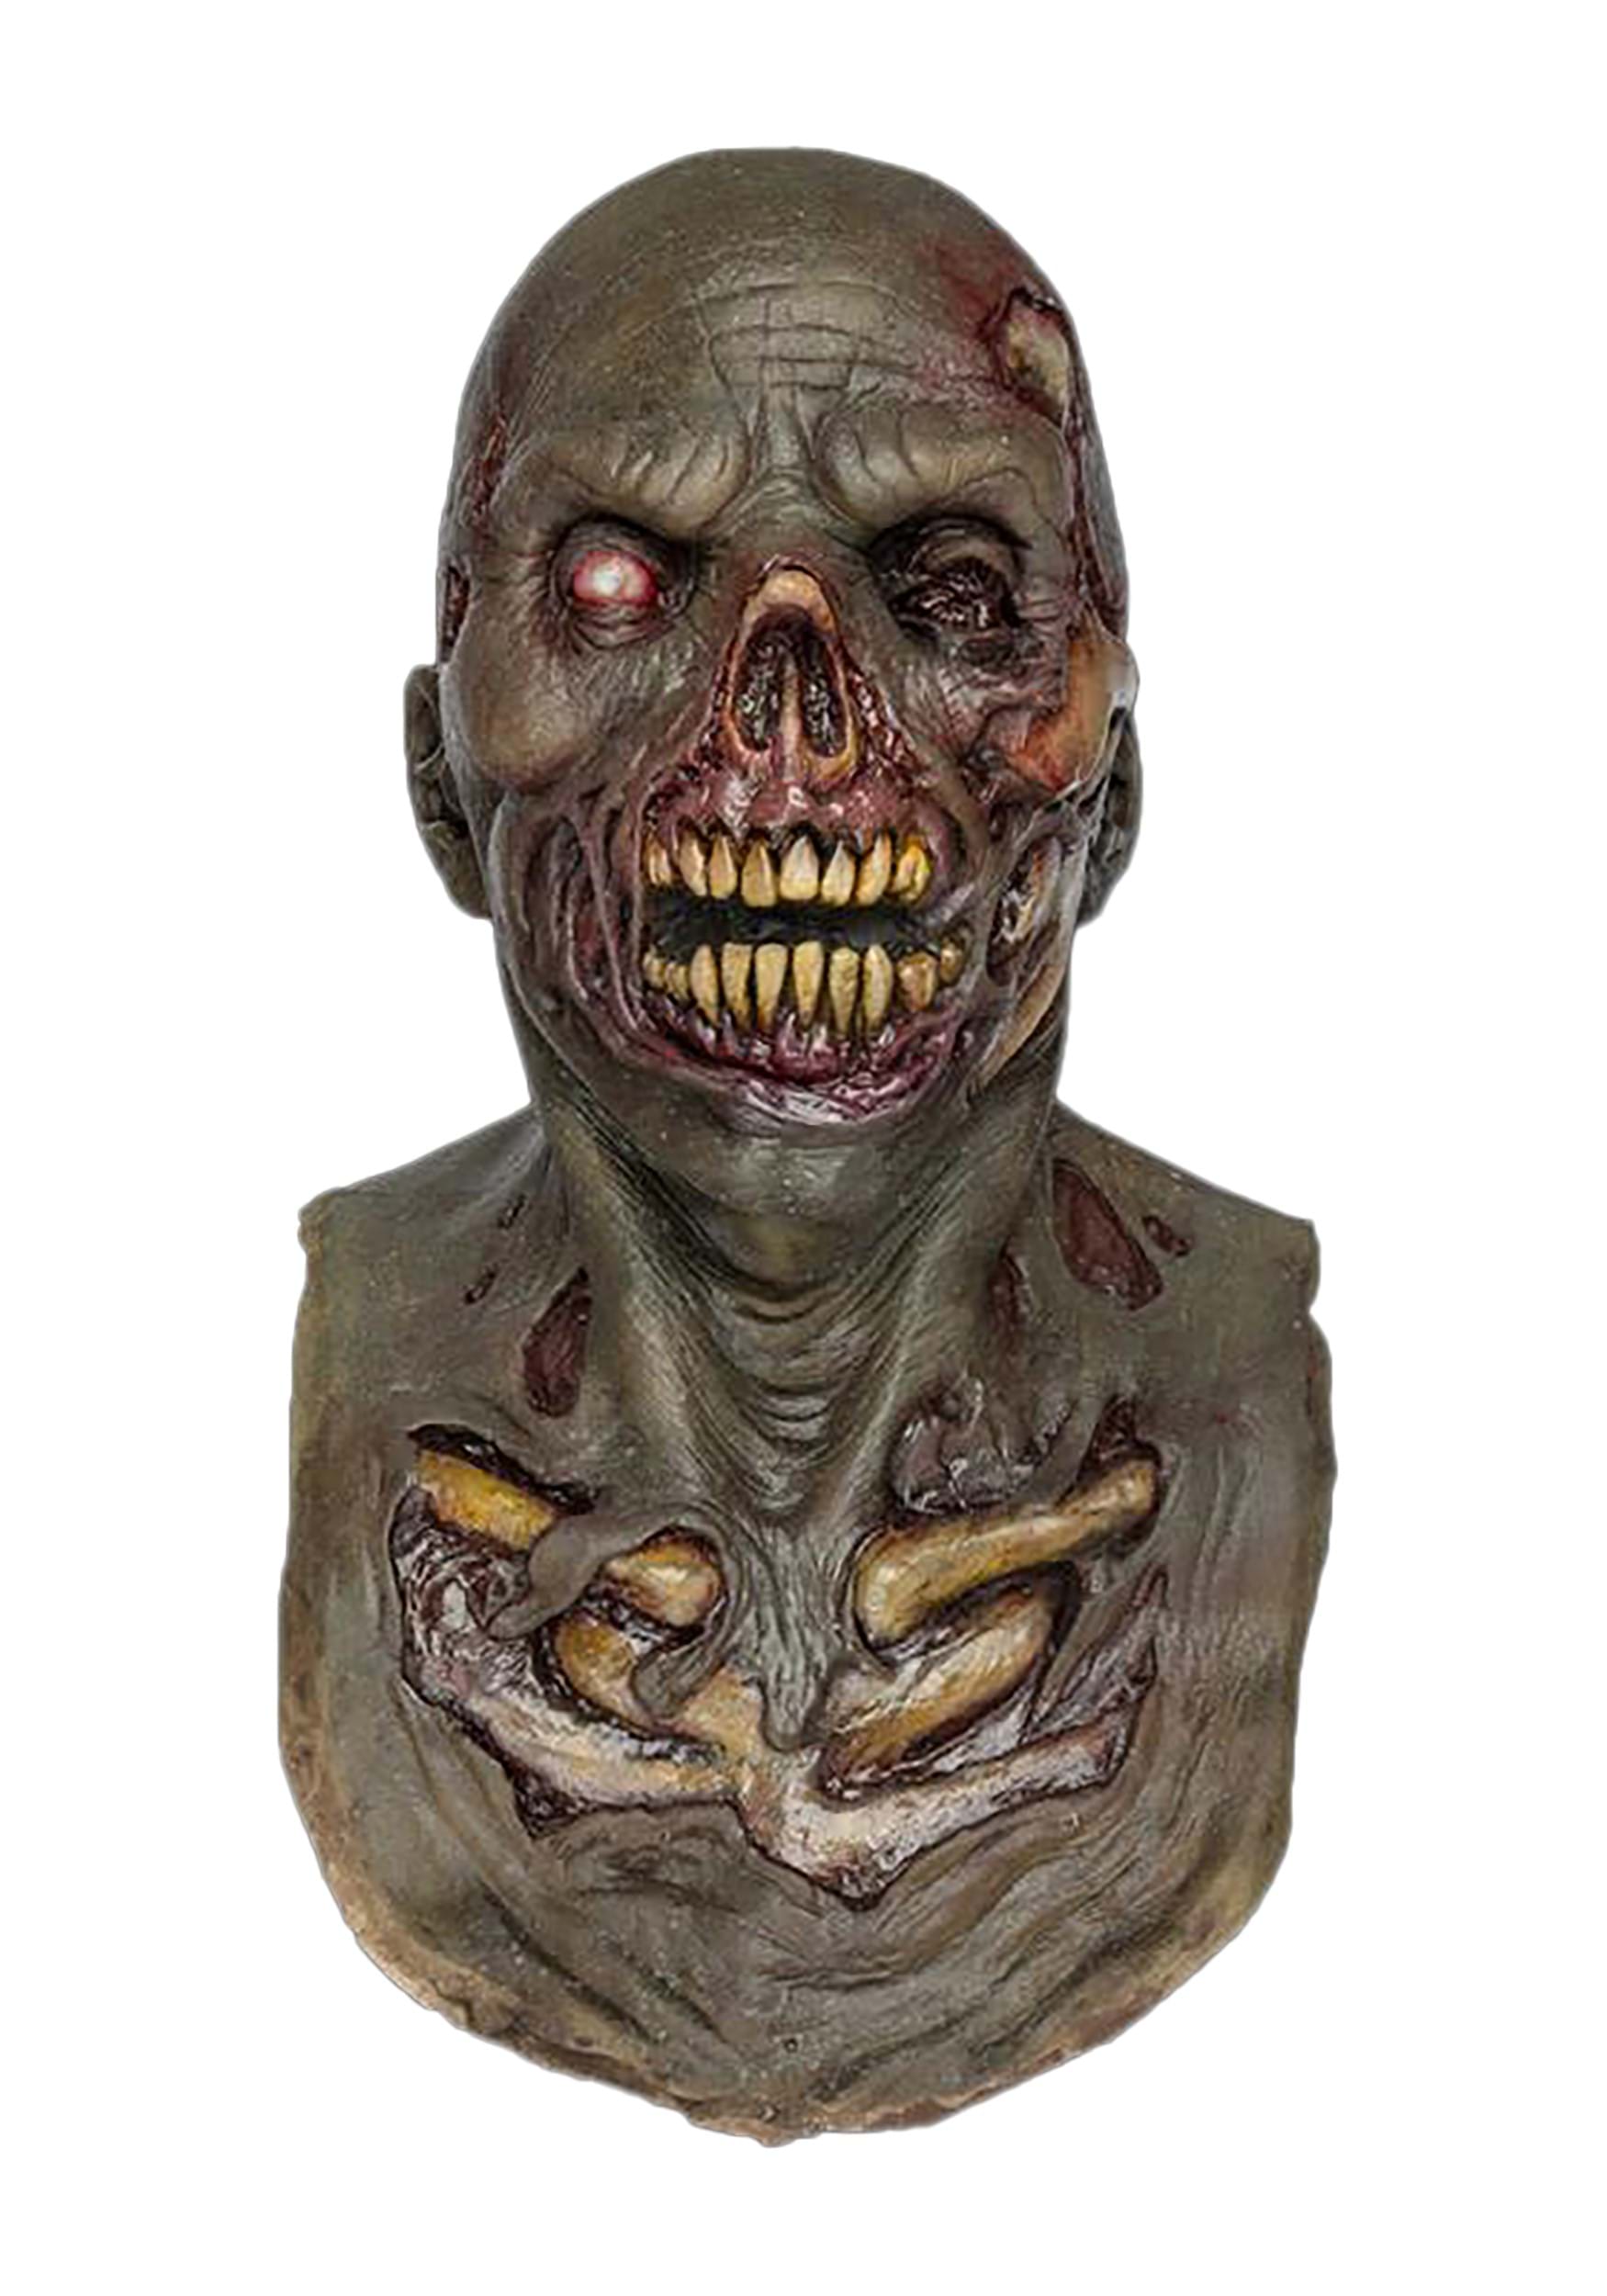 Image of Stench Zombie Adult Mask ID OK4102-ST